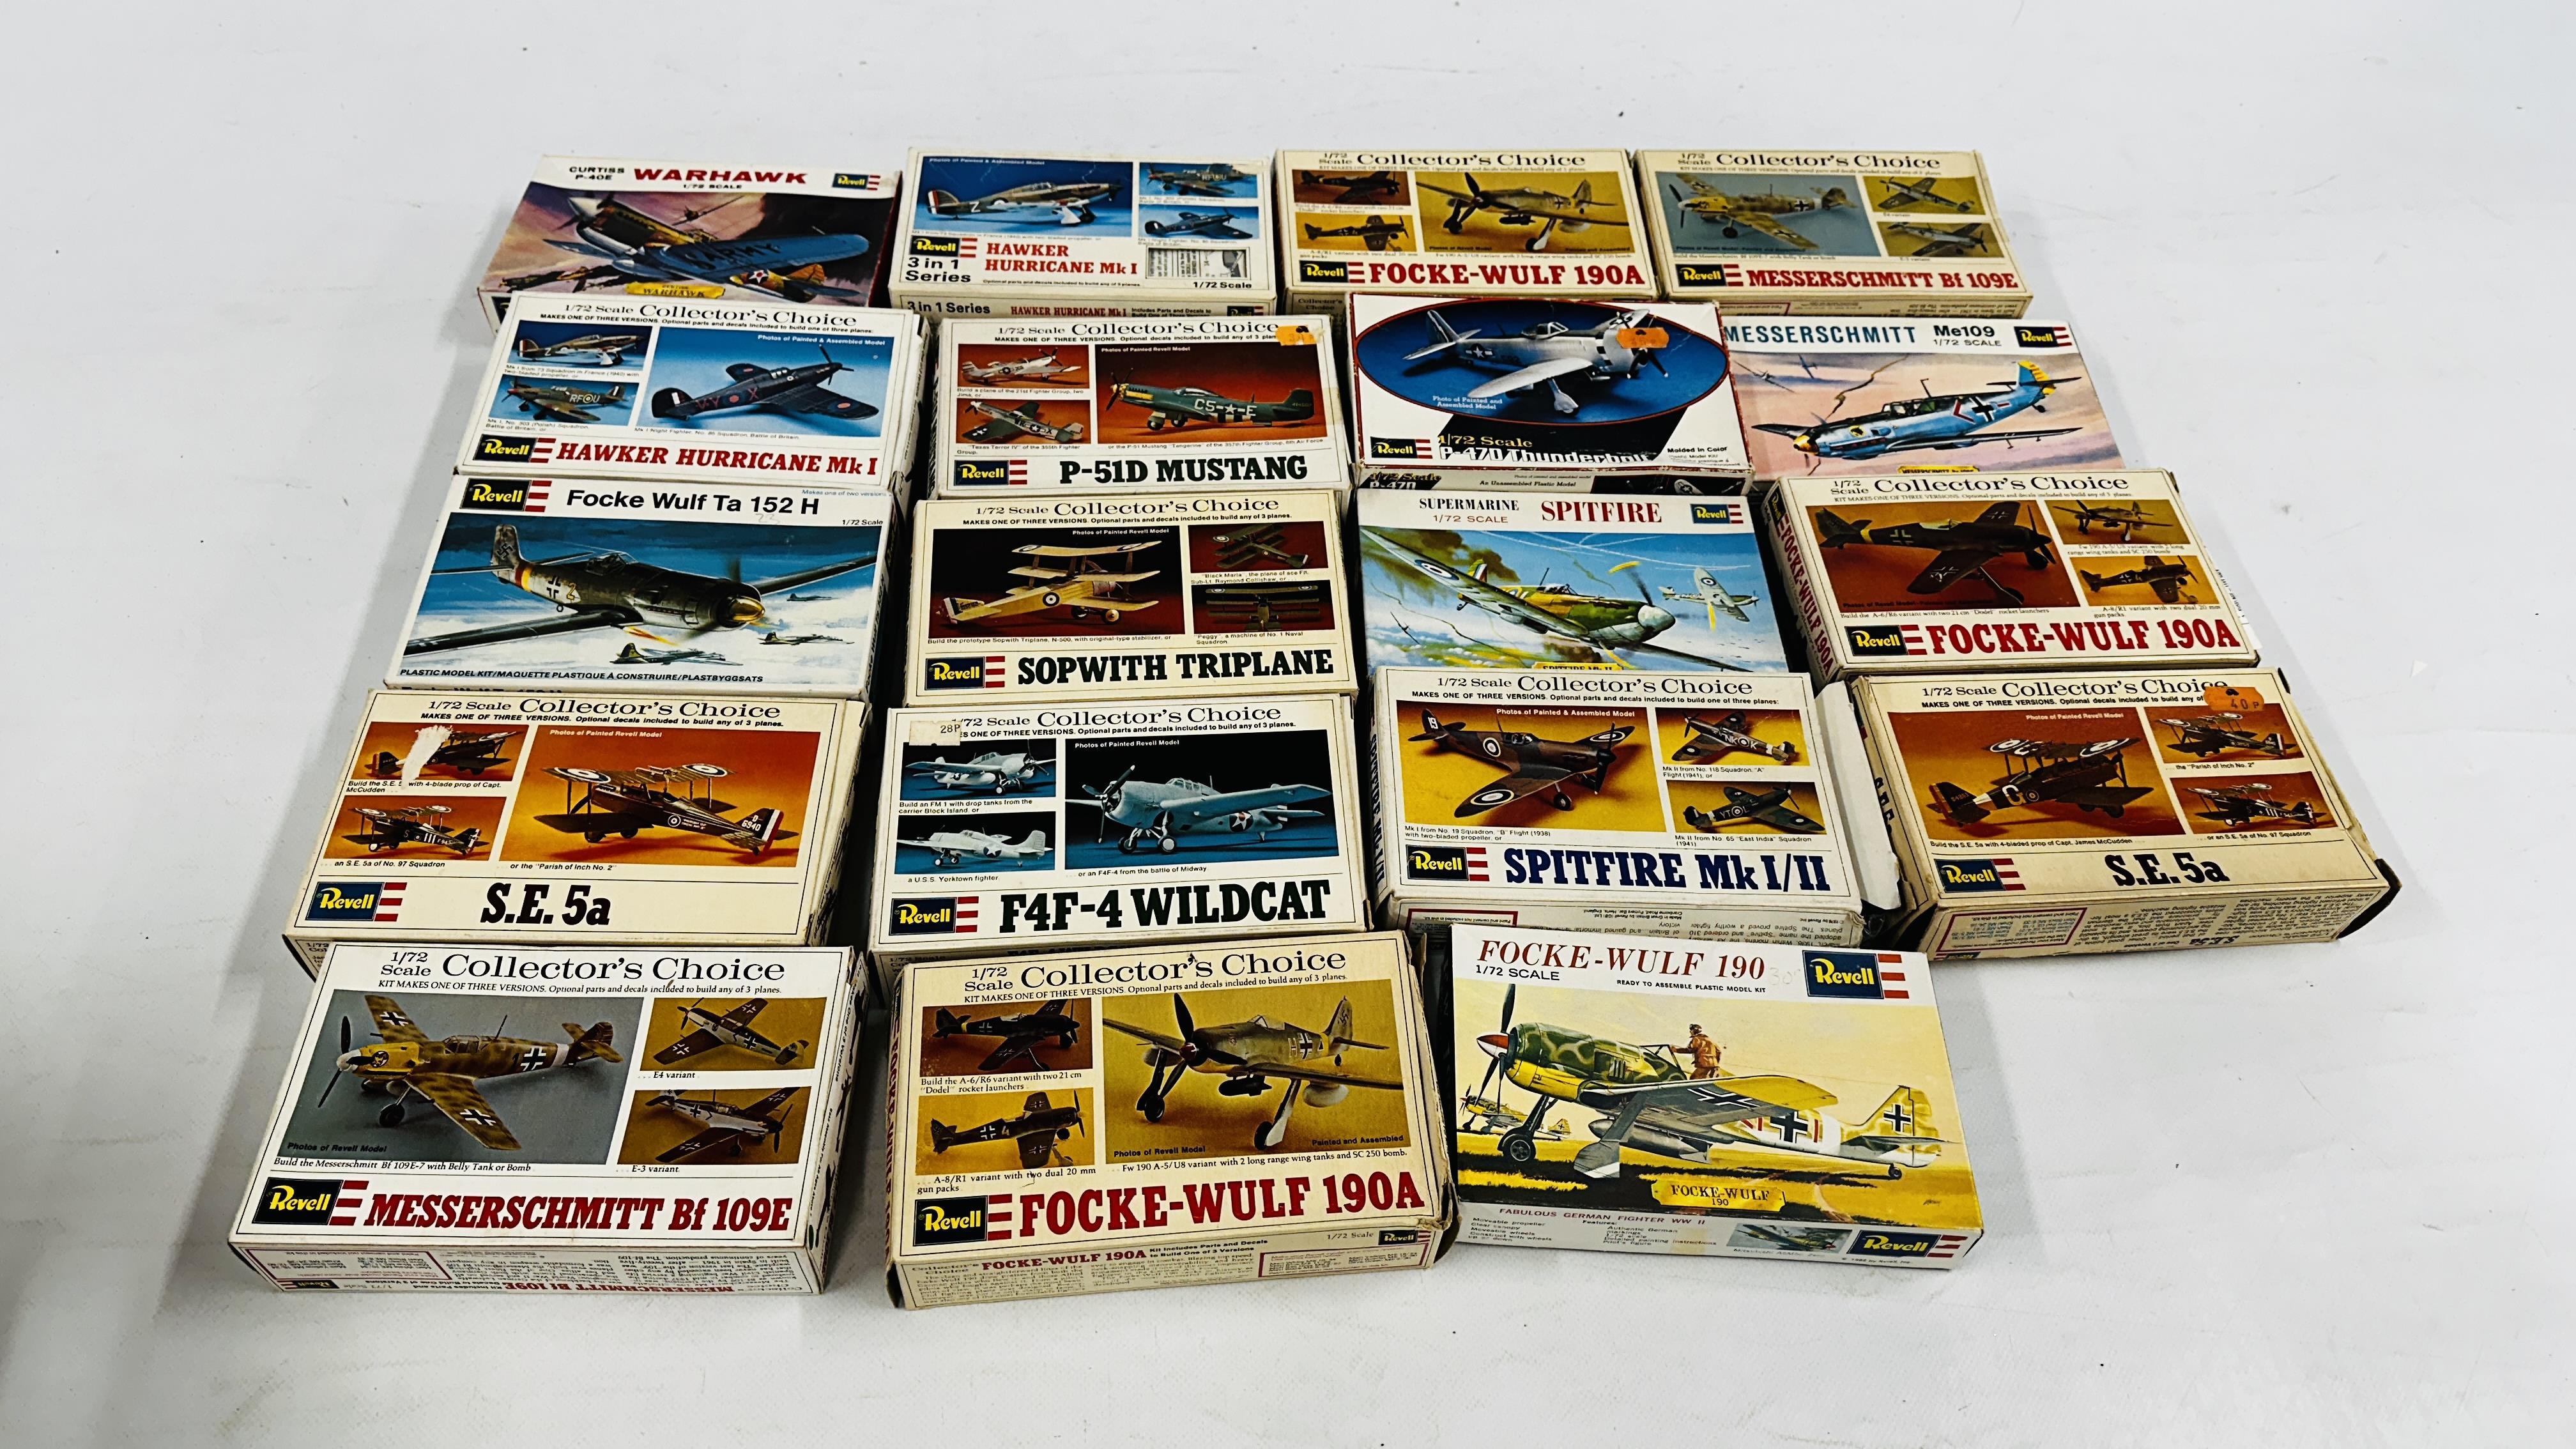 A BOX CONTAINING A COLLECTION OF 19 REVELL MODEL AIRCRAFT KITS.